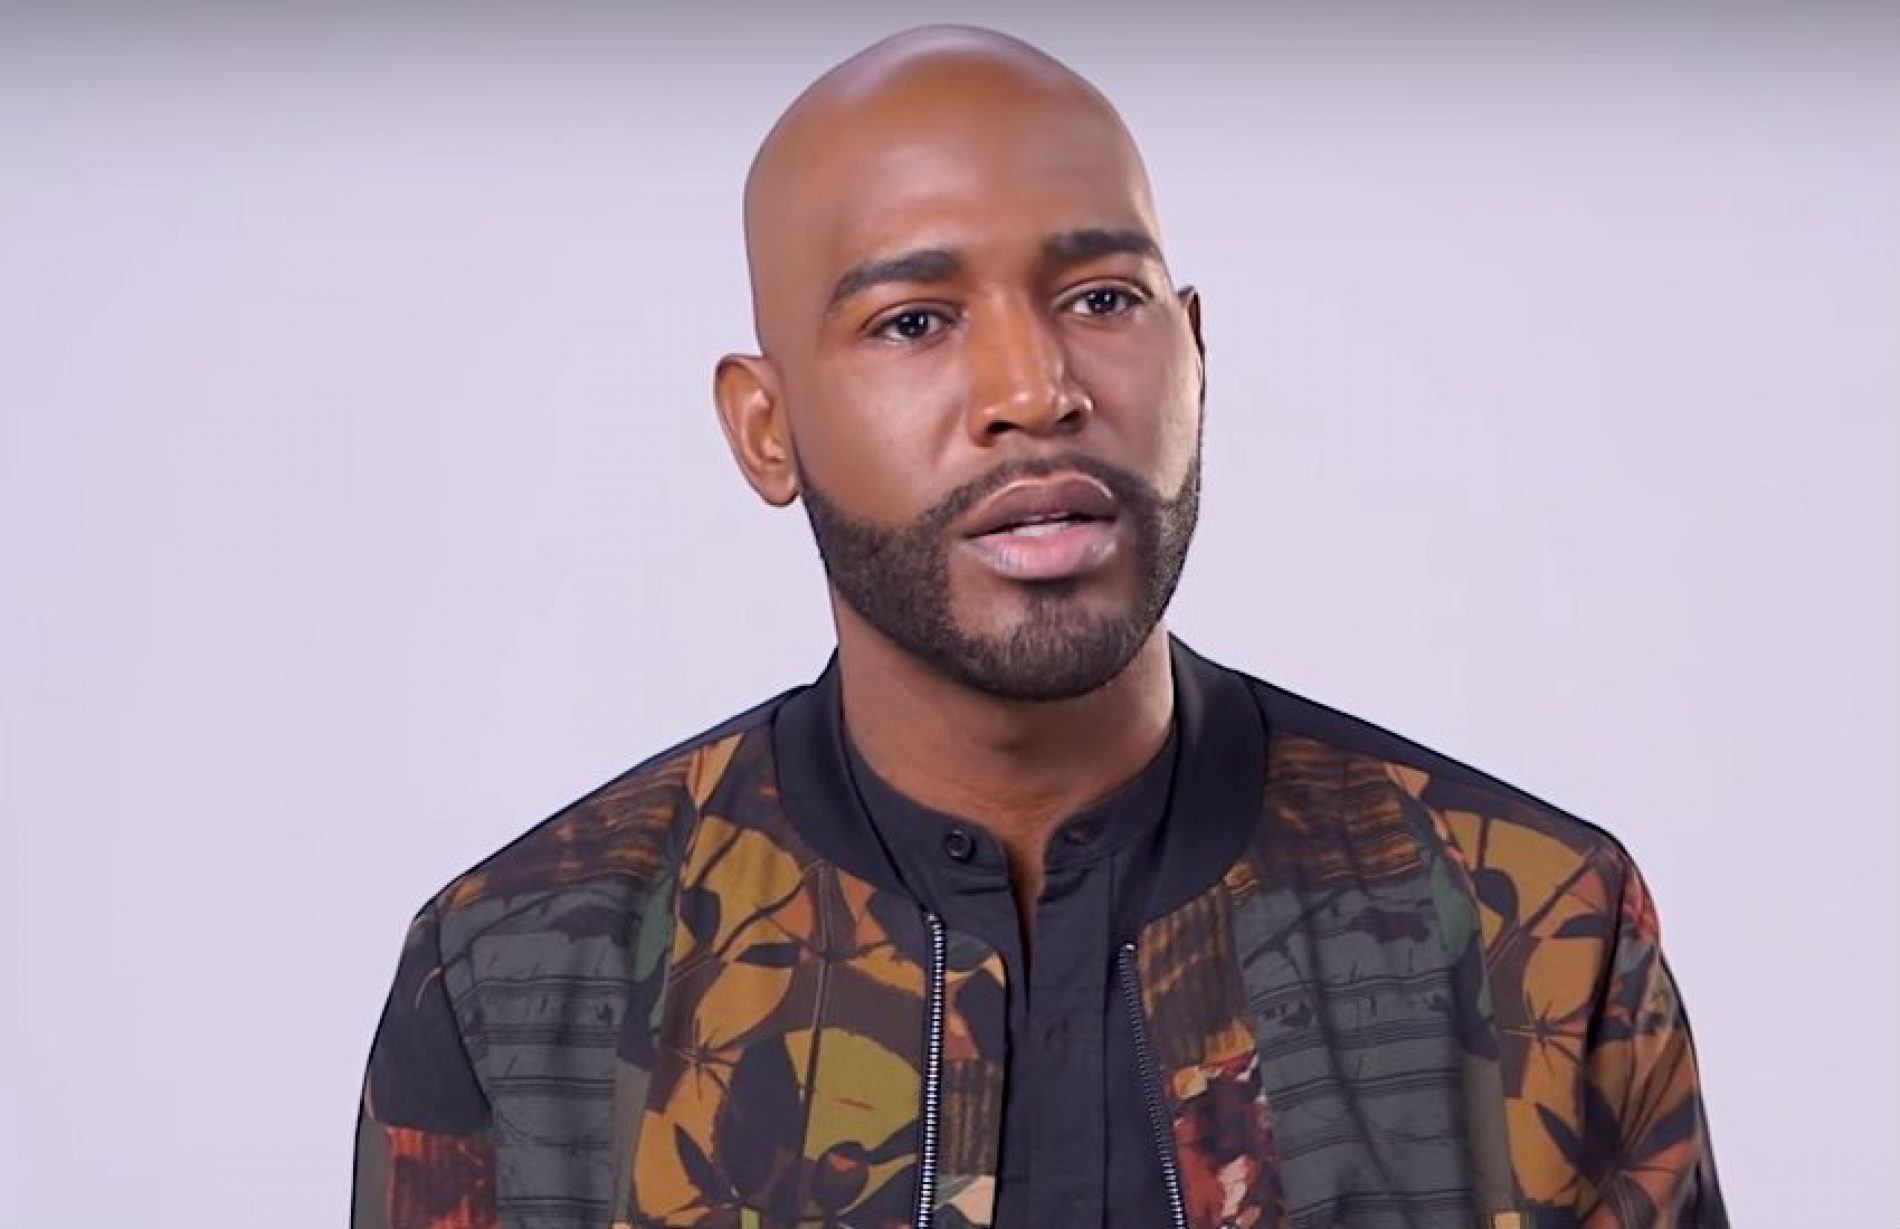 Karamo Brown thinks ‘Call Me By Your Name’ is problematic